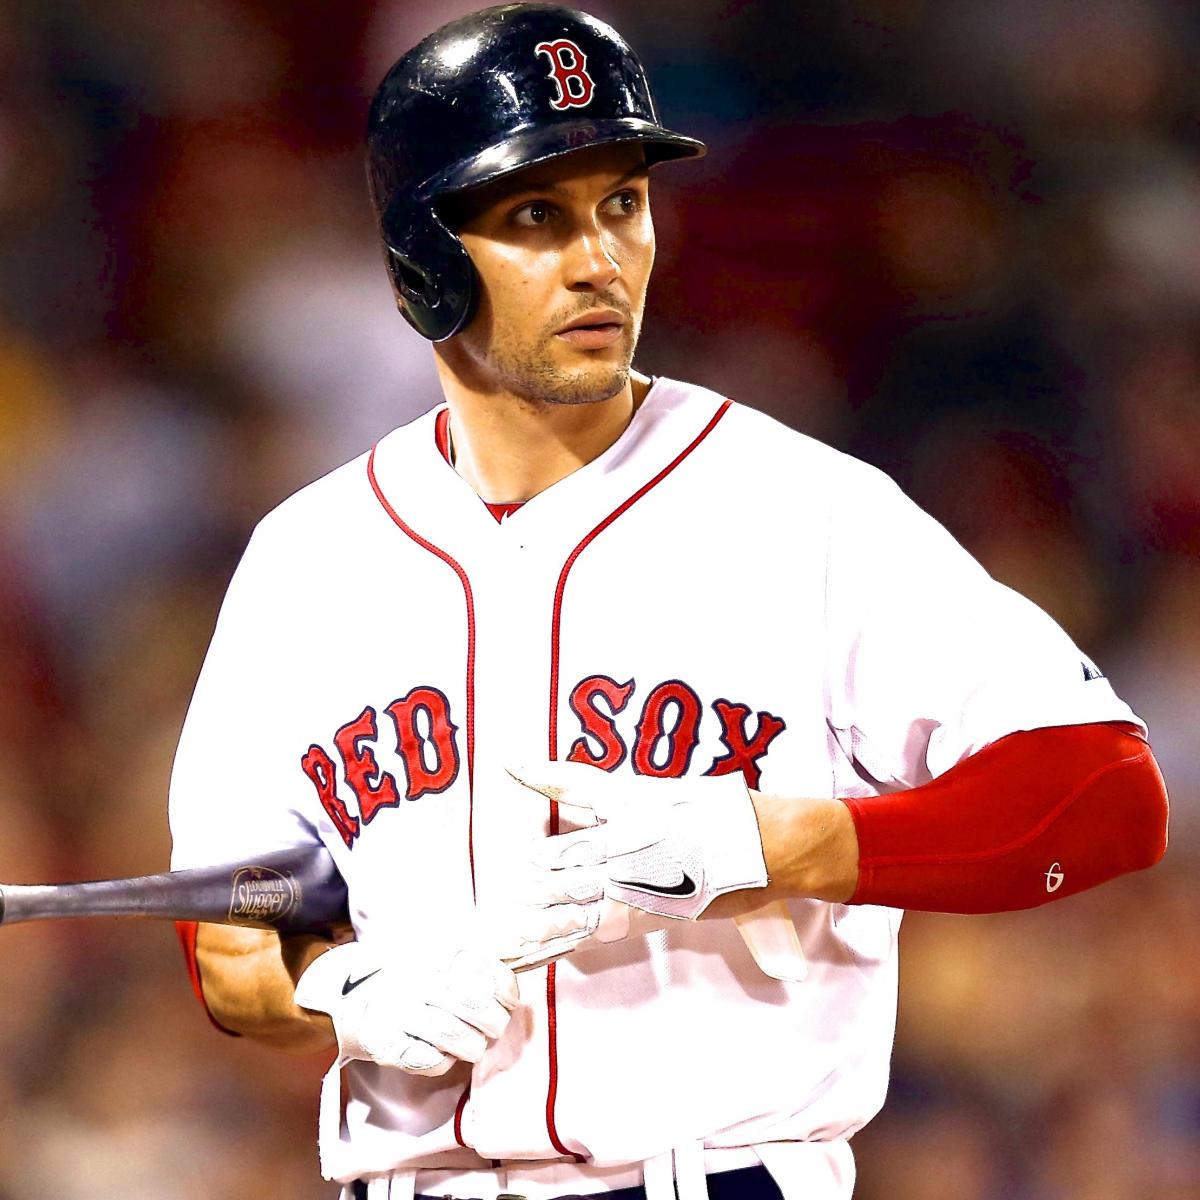 One-time superstar Grady Sizemore makes Red Sox after missing two full  seasons with injuries